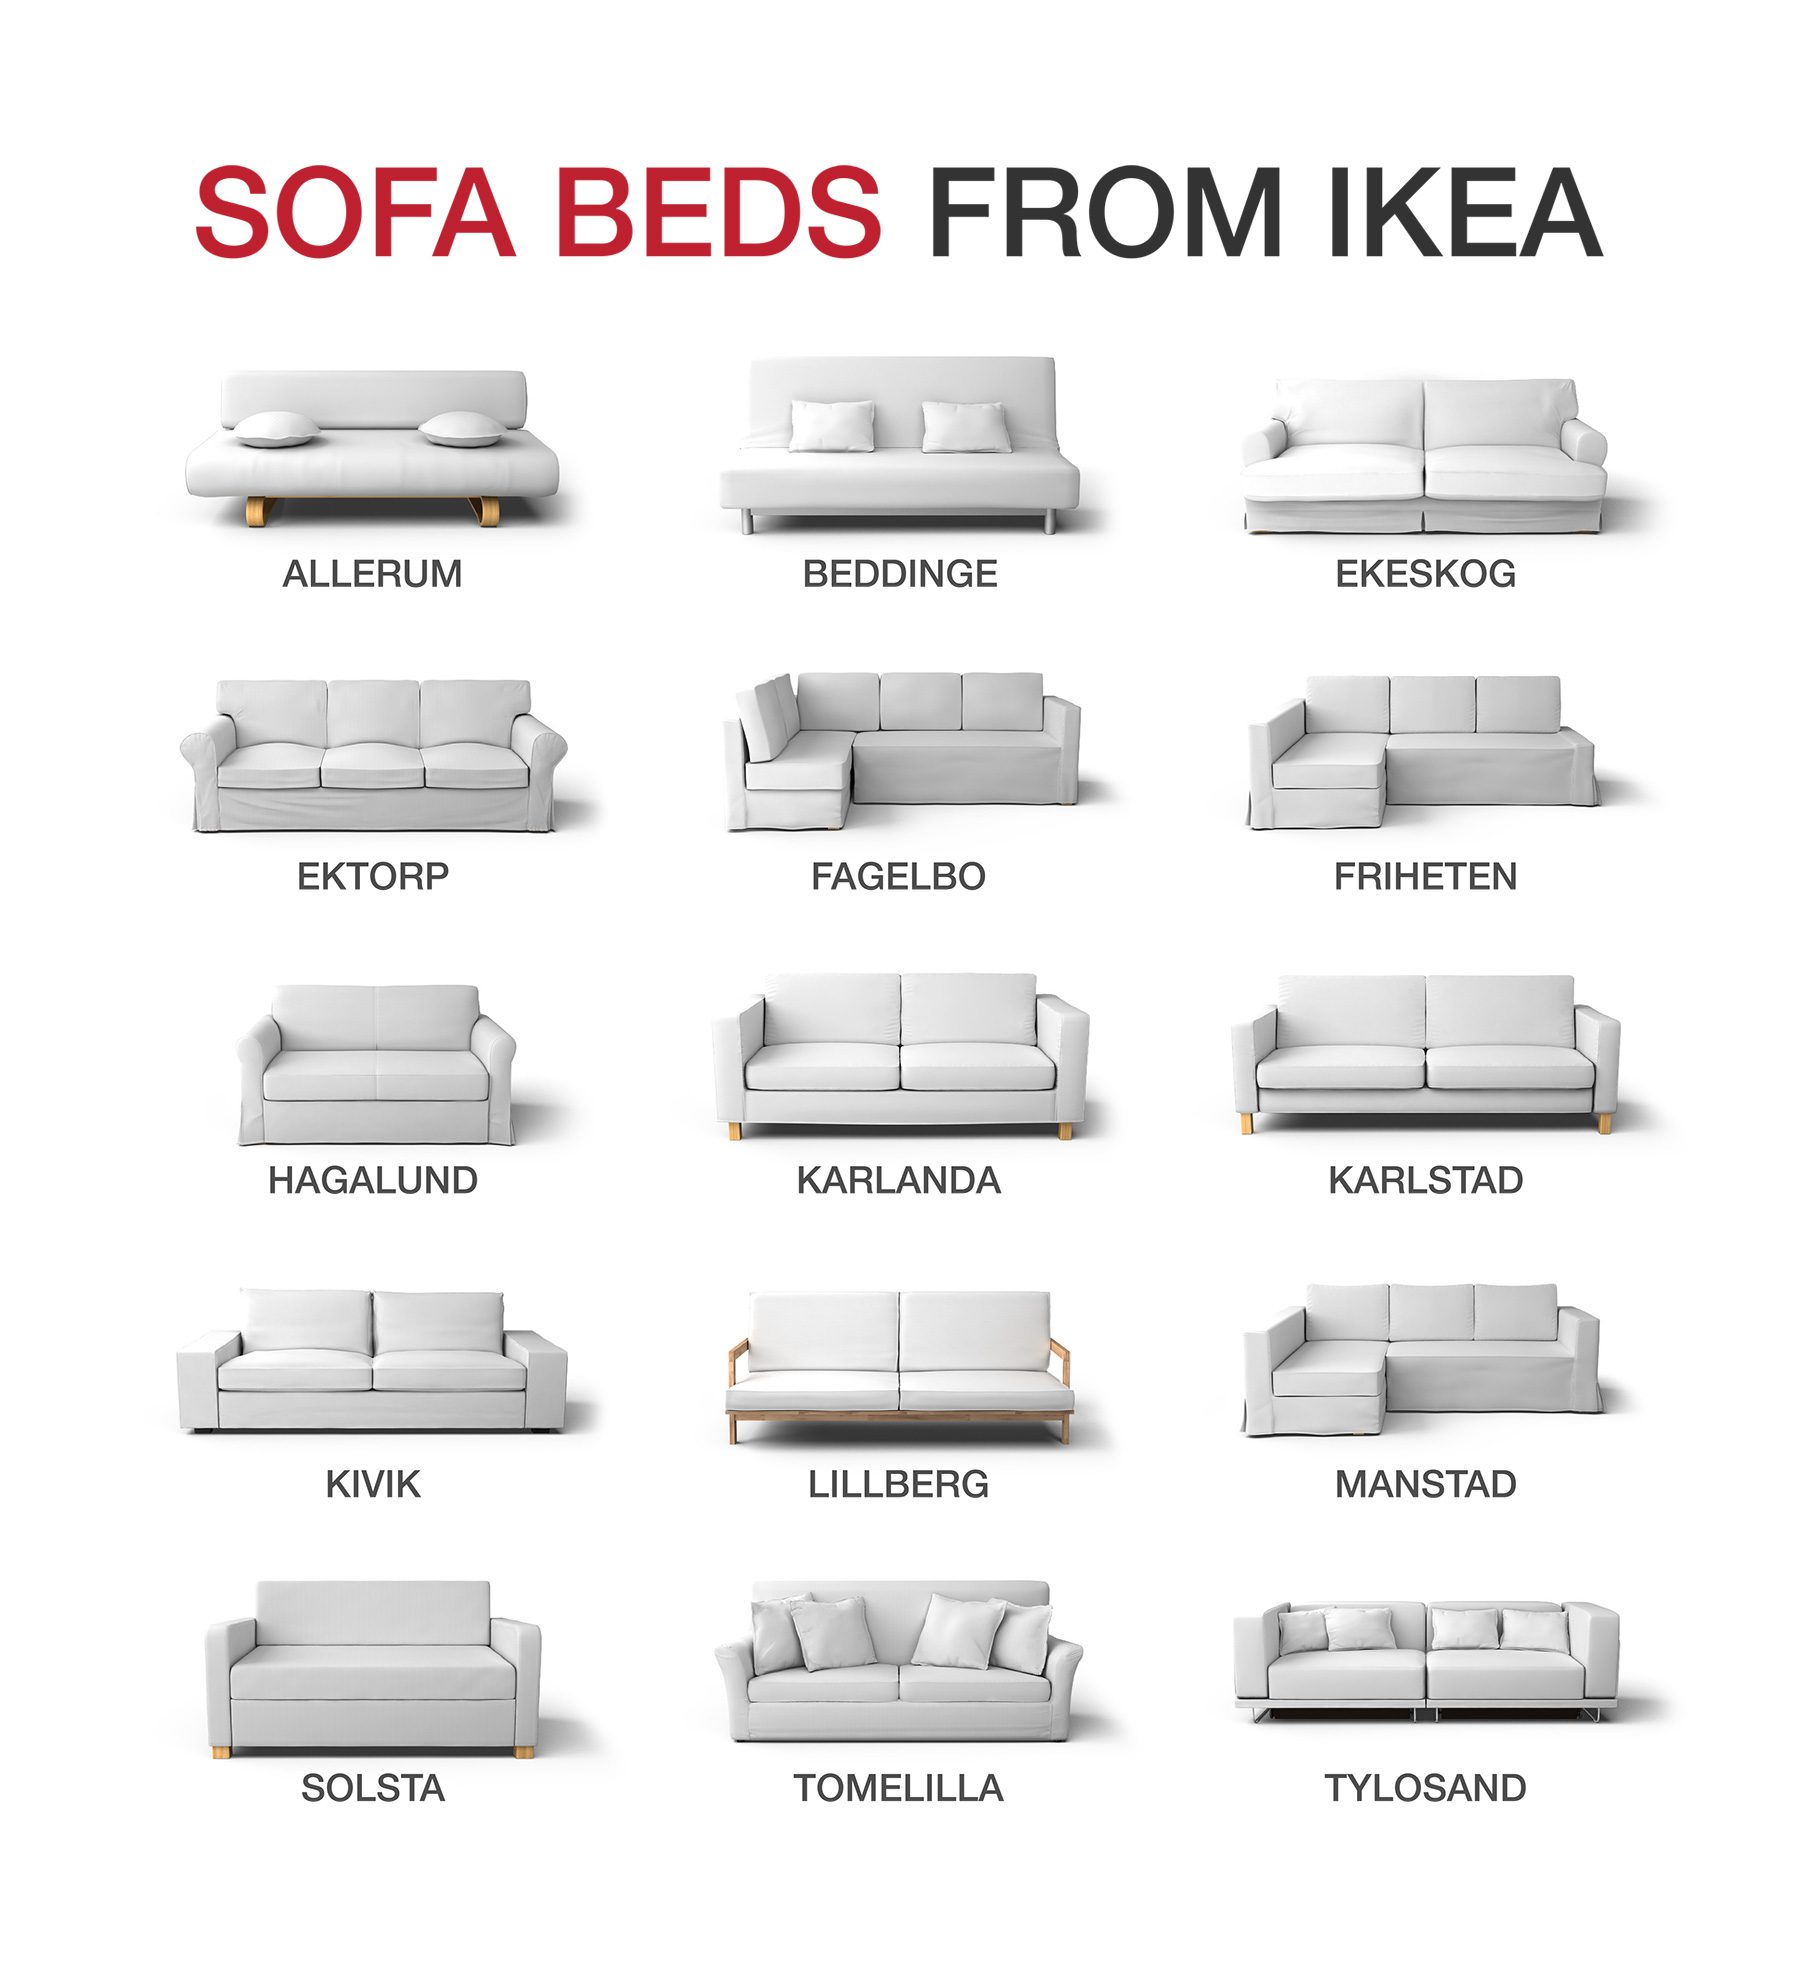 Plantkunde drie constante What IKEA Sofa Bed model is this? | Comfort Works Blog & Sofa Resources